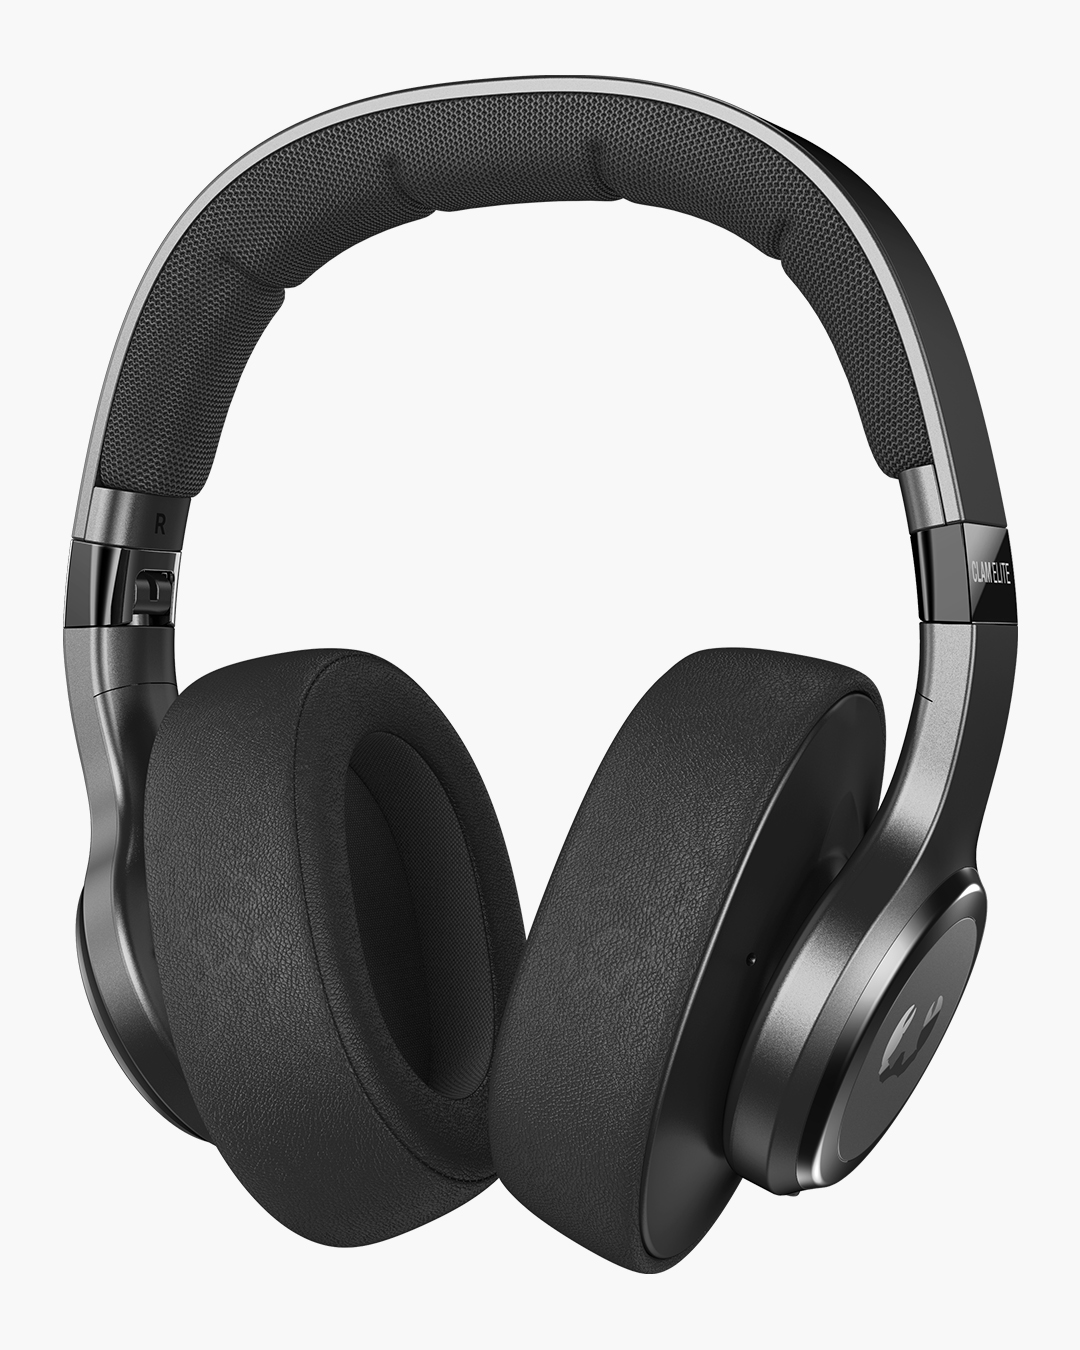 Fresh 'n Rebel - Clam Elite - Wireless over-ear headphones with digital noise cancelling - Storm Grey